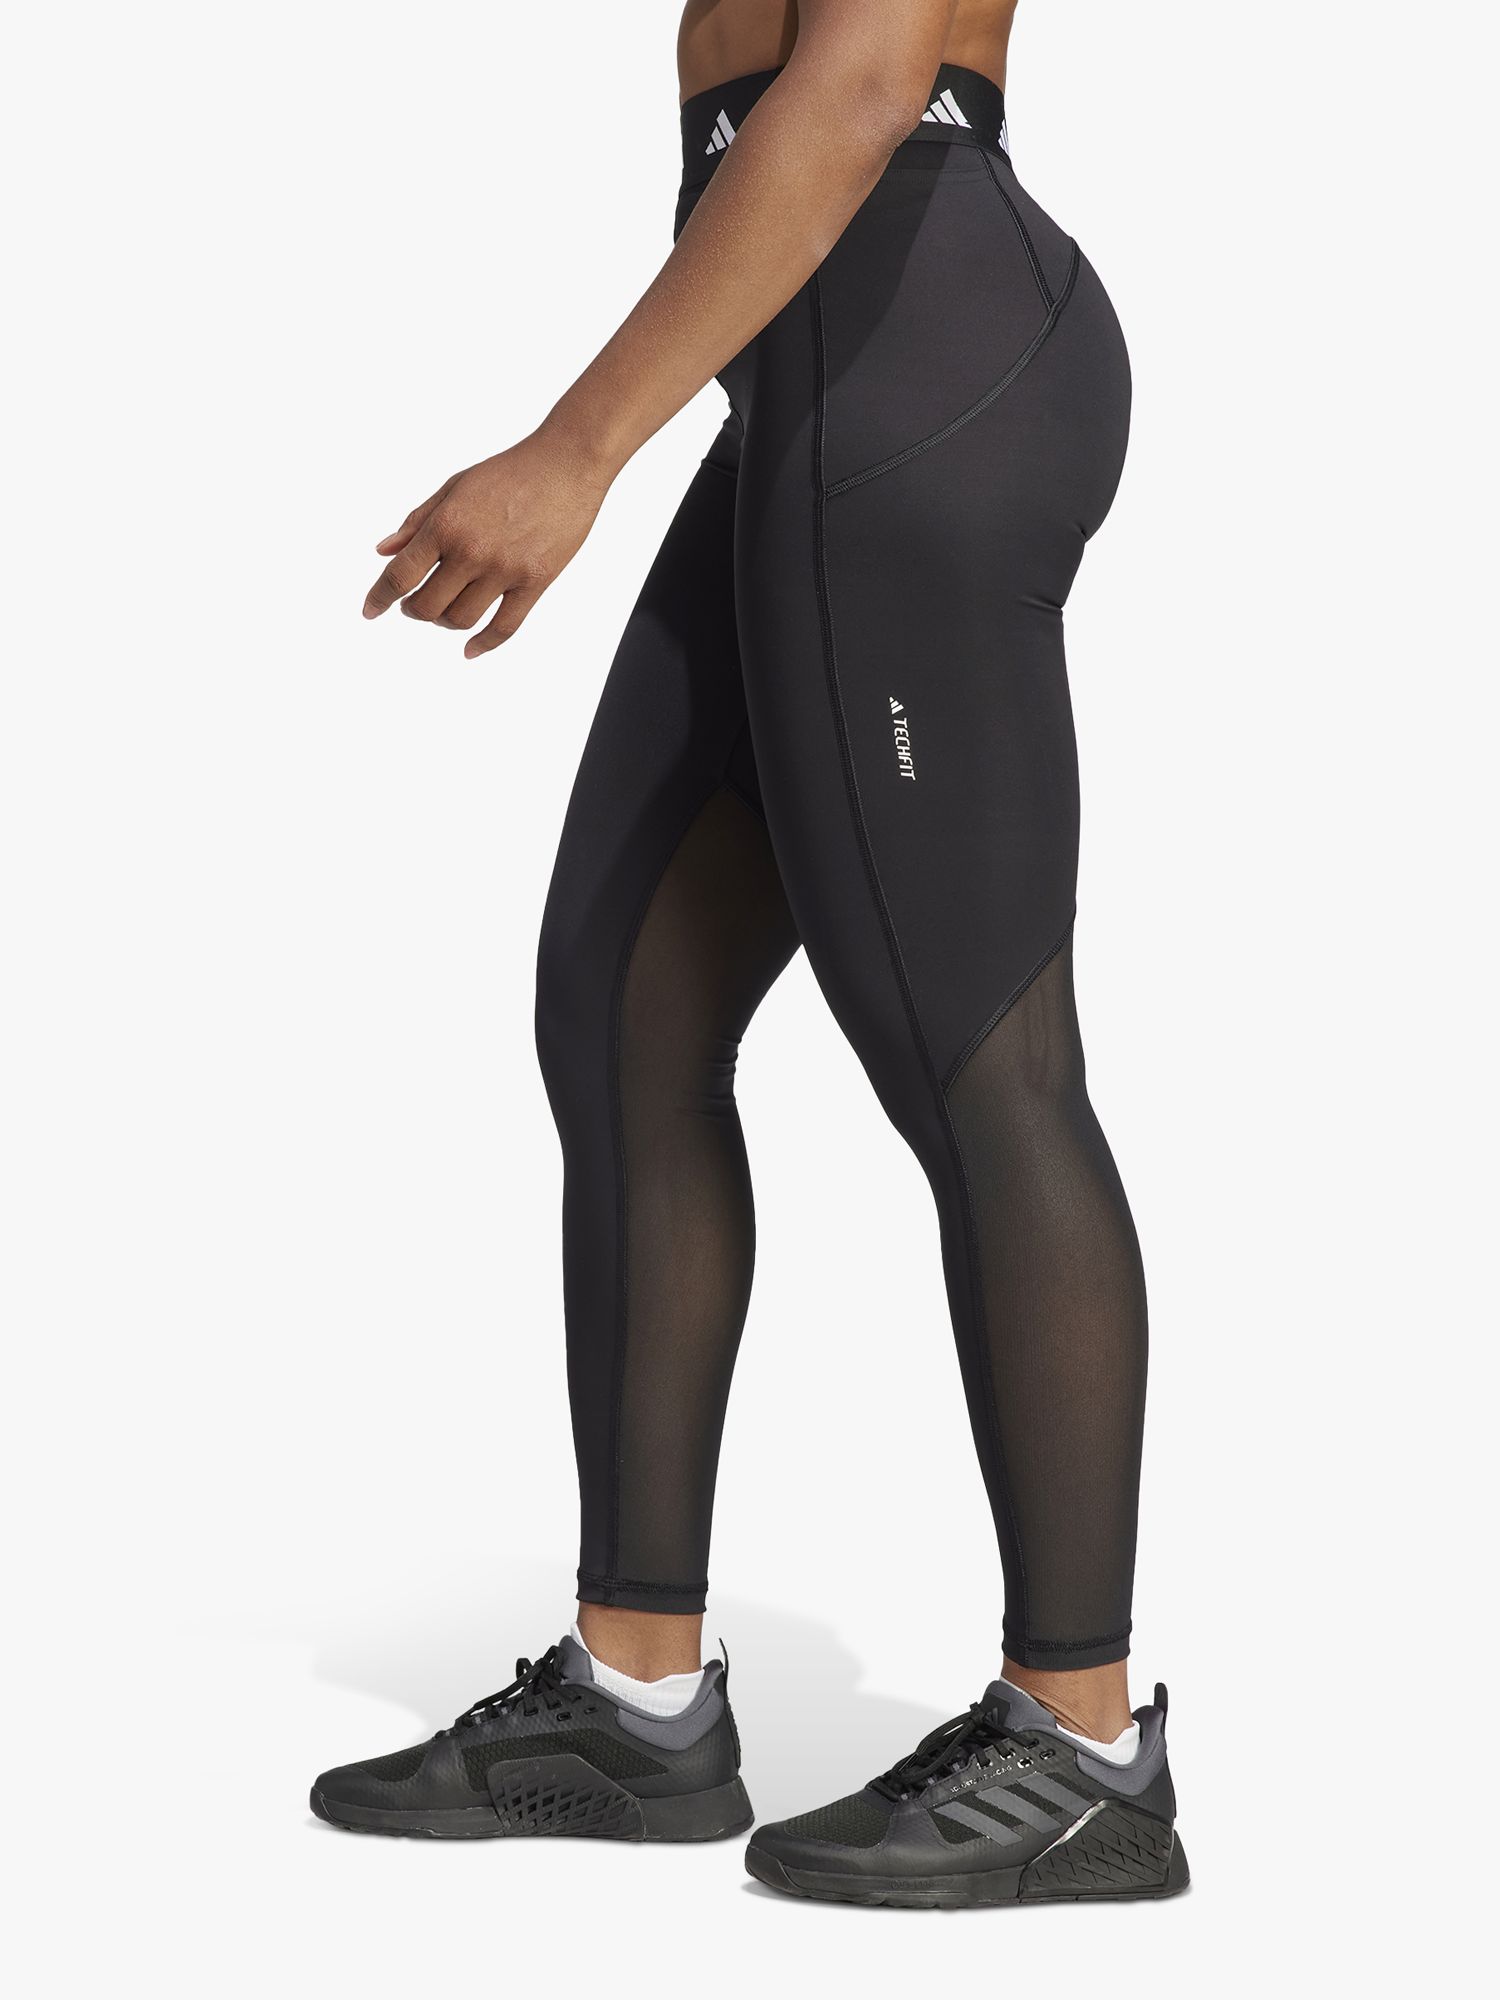 ADIDAS TechFit 1/1 Tights in Black/White